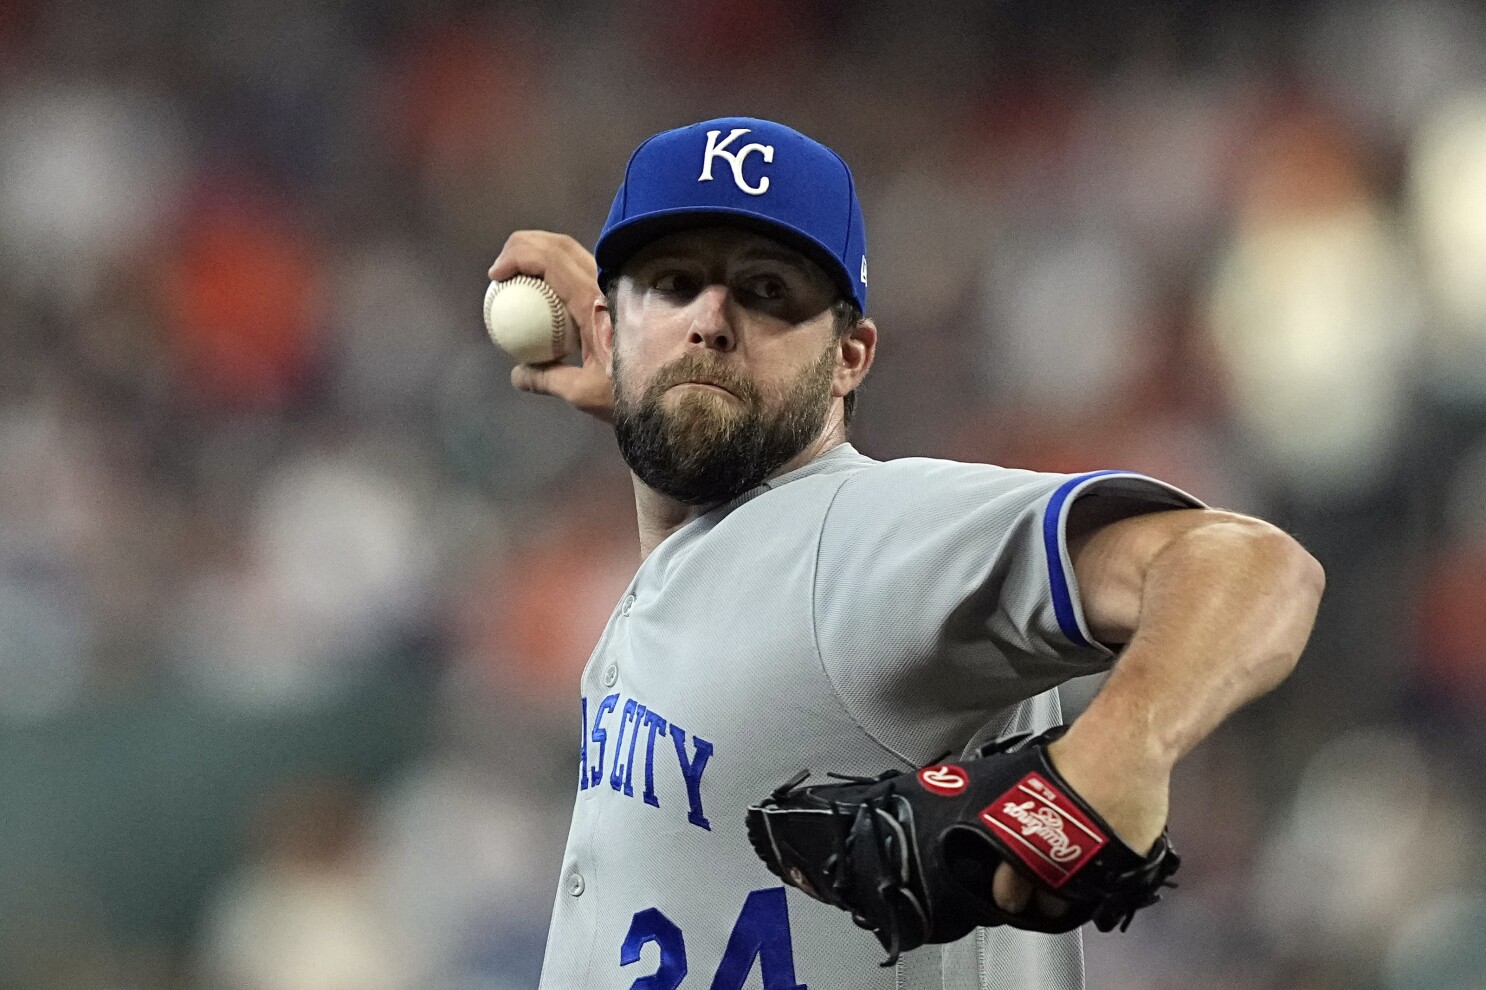 Through two games, KC Royals are only scoreless team in MLB